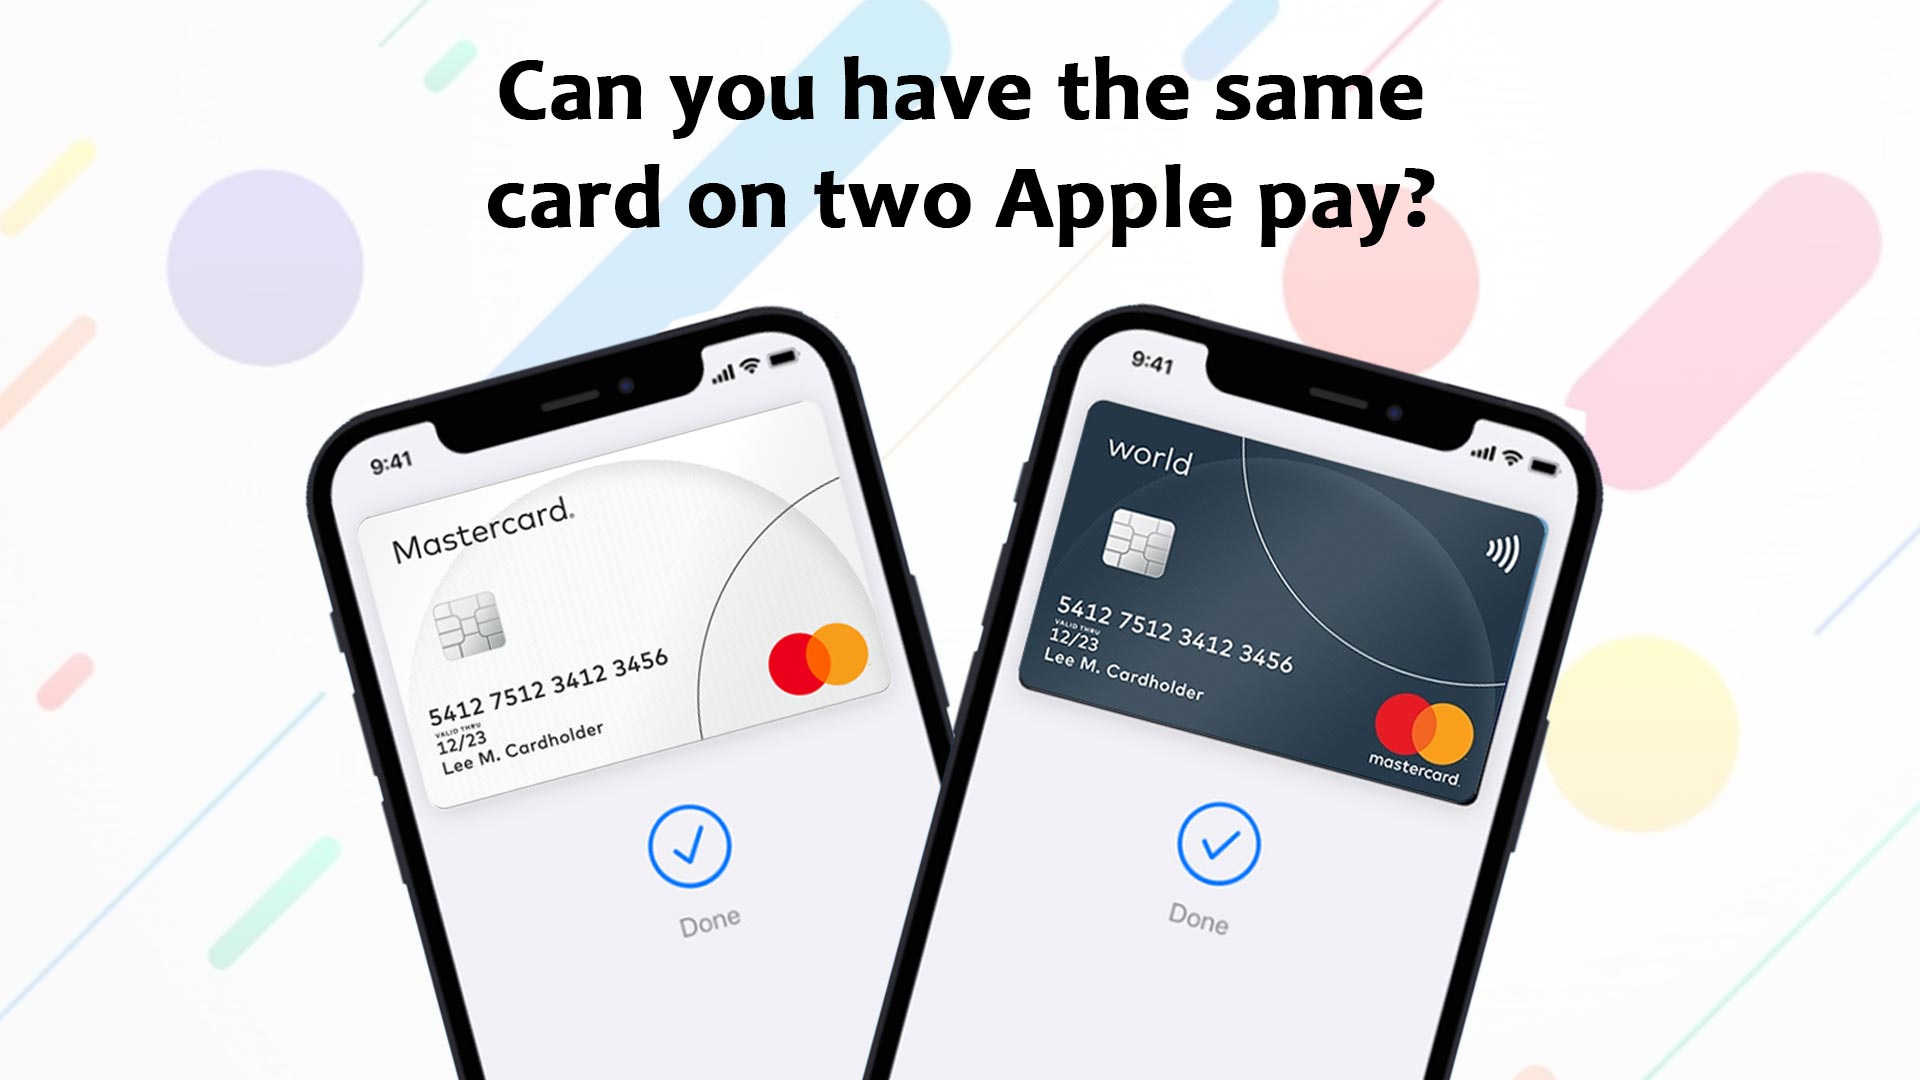 Can you have the same card on two Apple pay